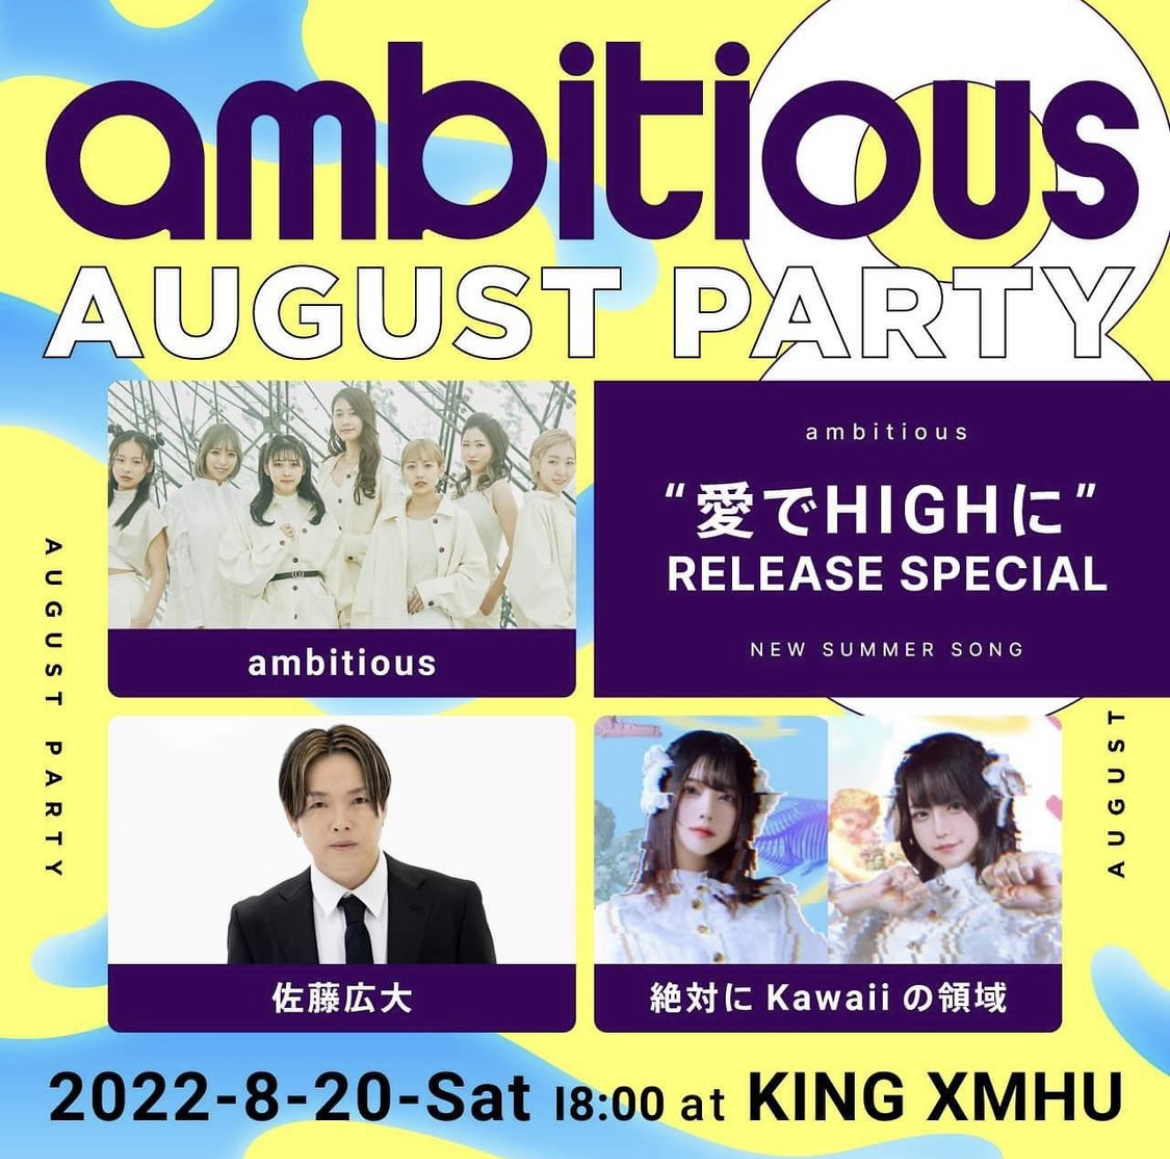 「ambitious AUGUST PARTY “愛でHIGHに”リリーススペシャル！」@KING XMHU